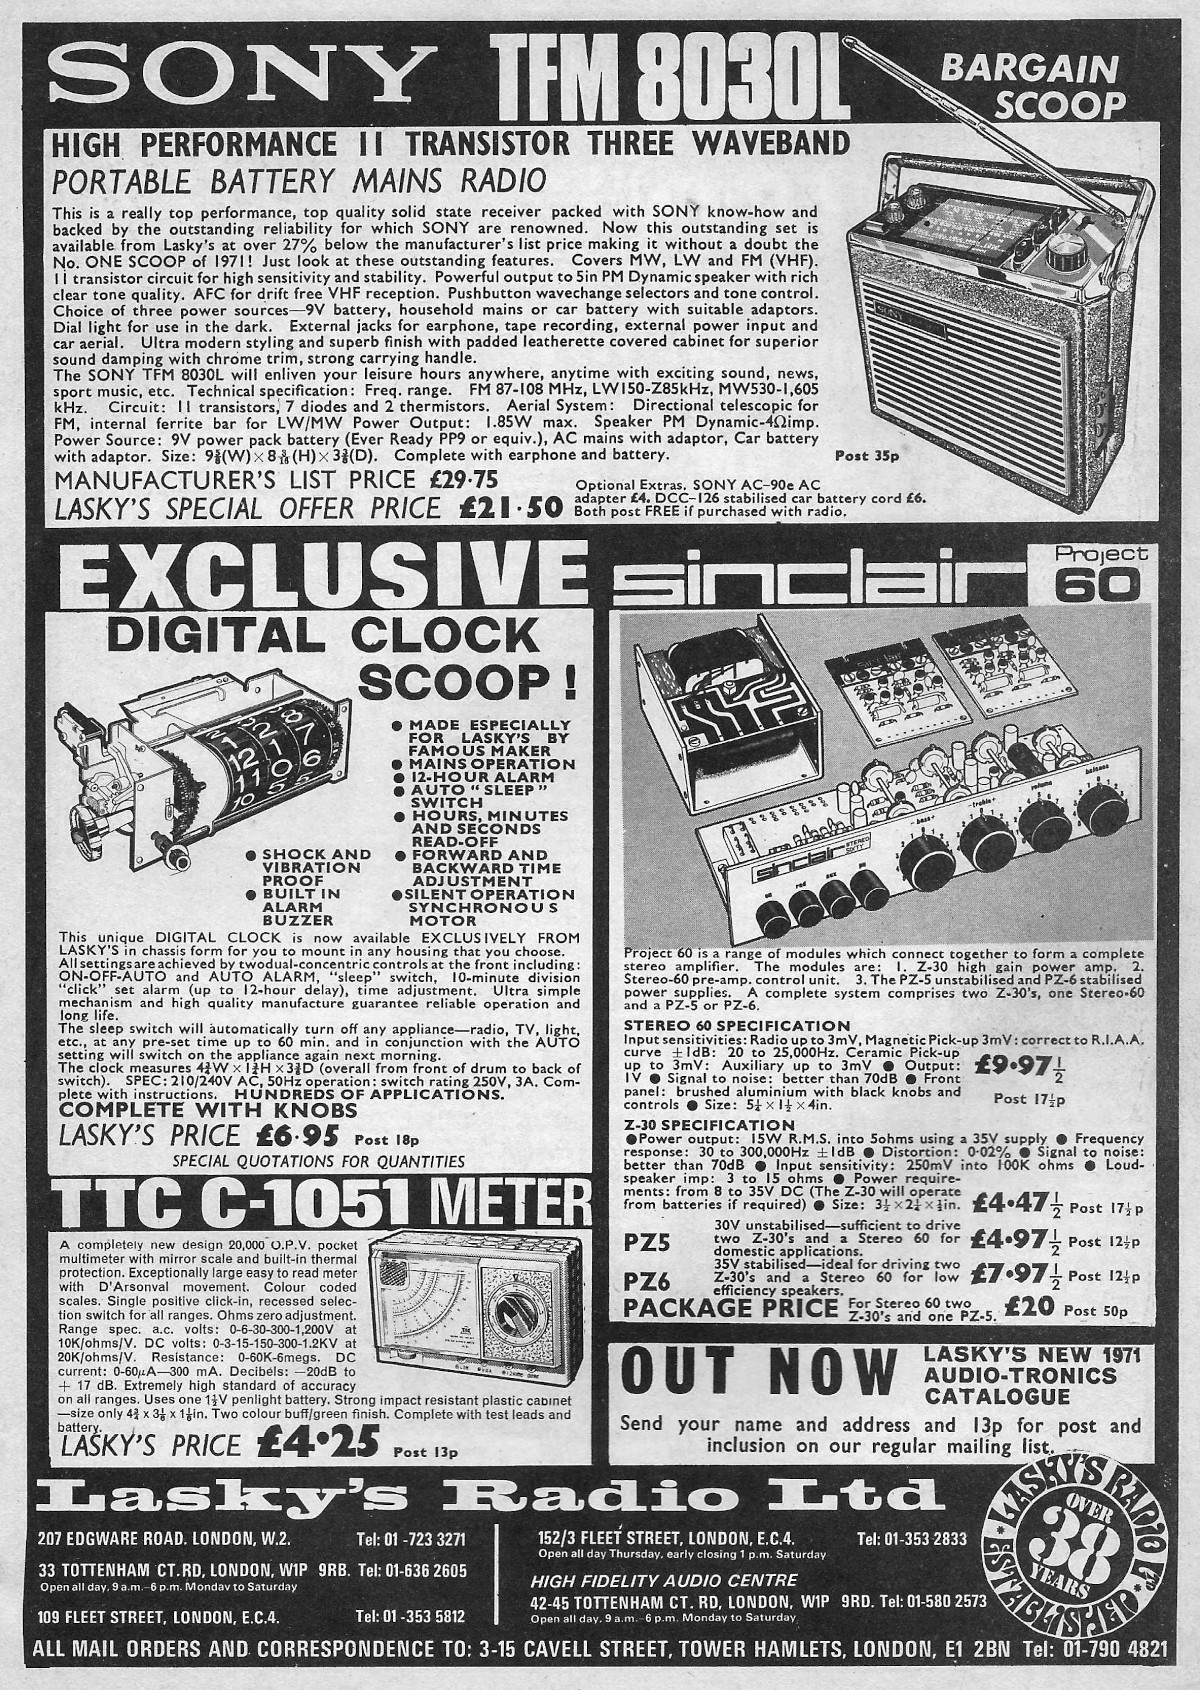 In a spooky echo of the future, Lasky's in 1971 - as Lasky's Radio <span class='hilite'><span class='hilite'>Ltd</span></span> - is also selling a Sinclair product, in this case audio components from the Project 60 range. From Practical Electronics, March 1971